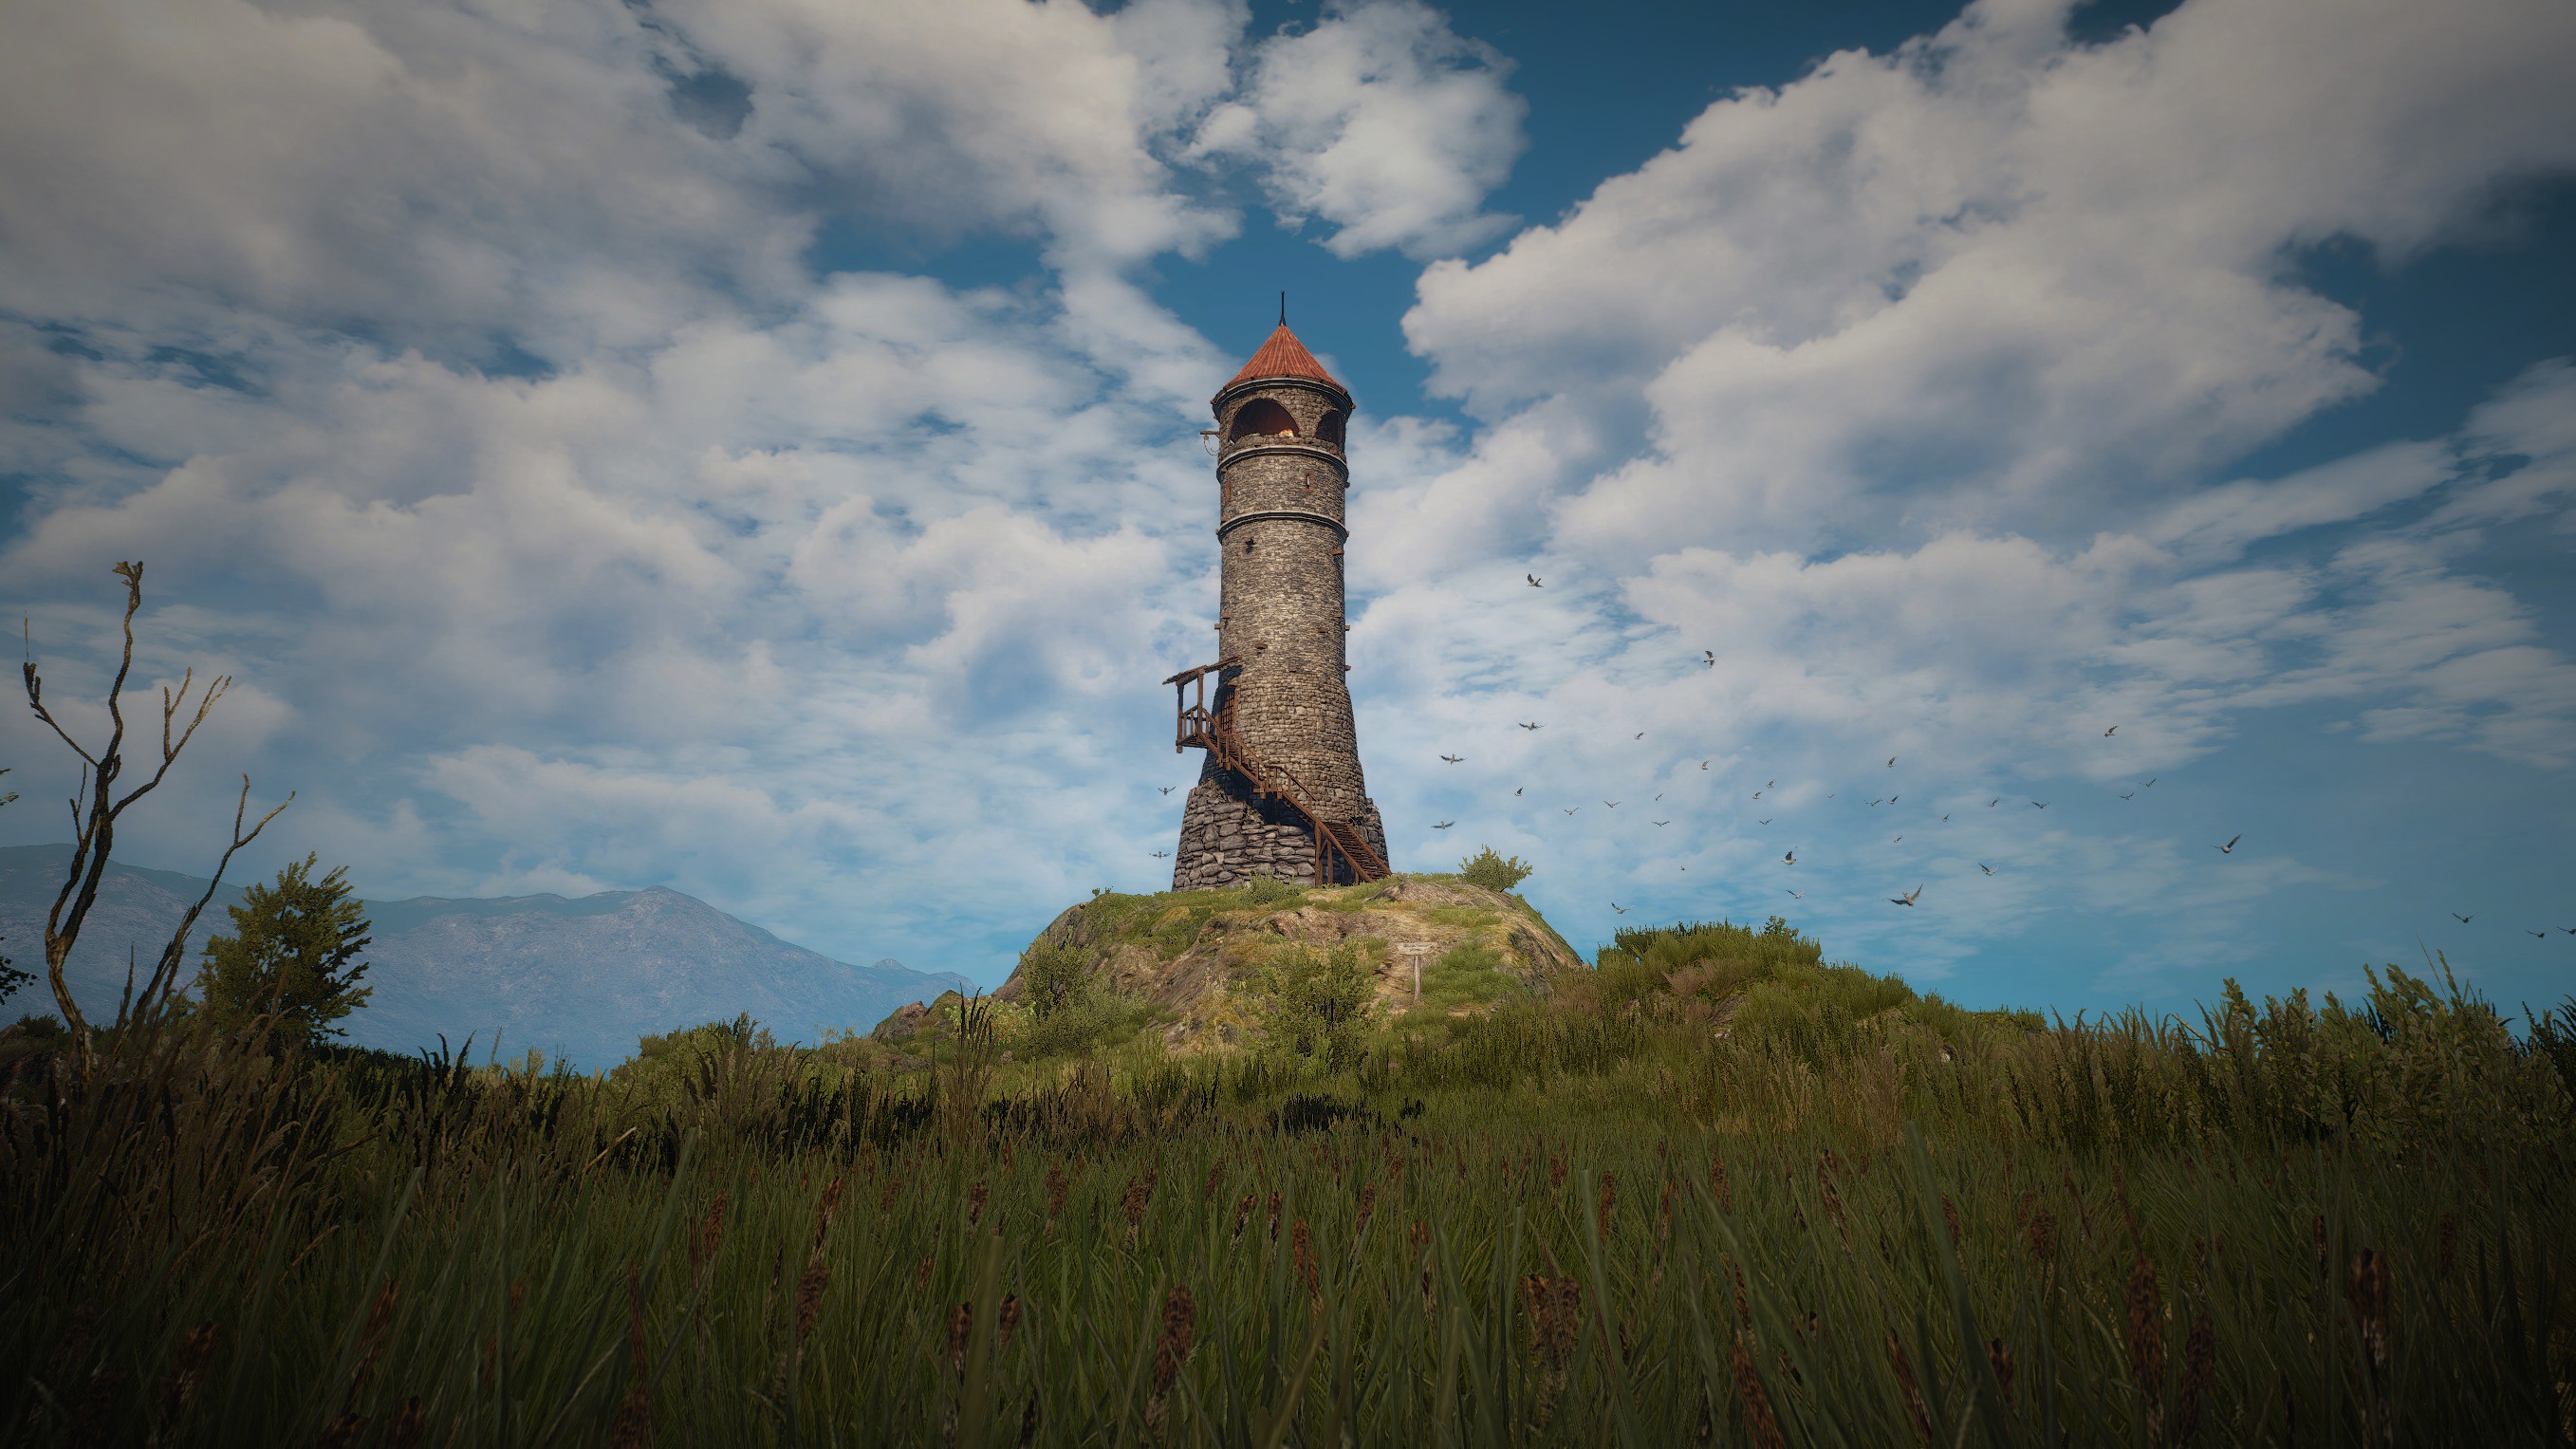 General 2715x1527 The Witcher 3: Wild Hunt lighthouse video games screen shot RPG PC gaming tower